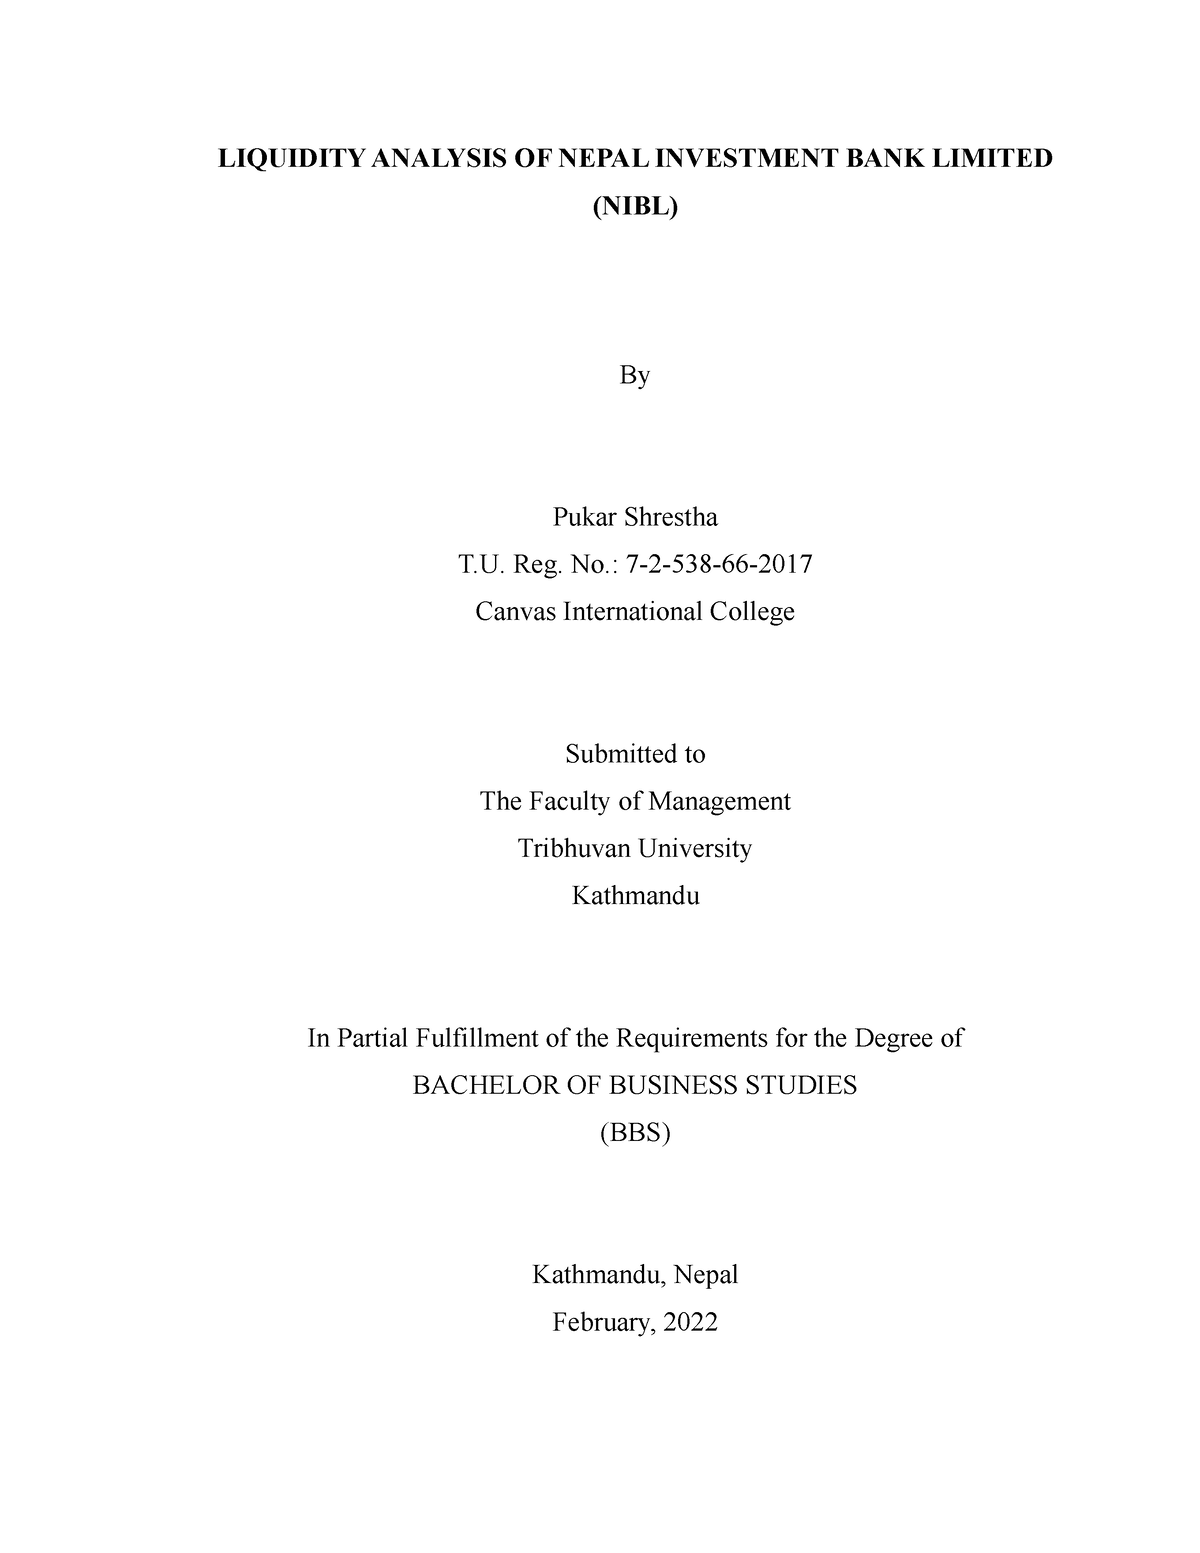 research report of bbs 4th year